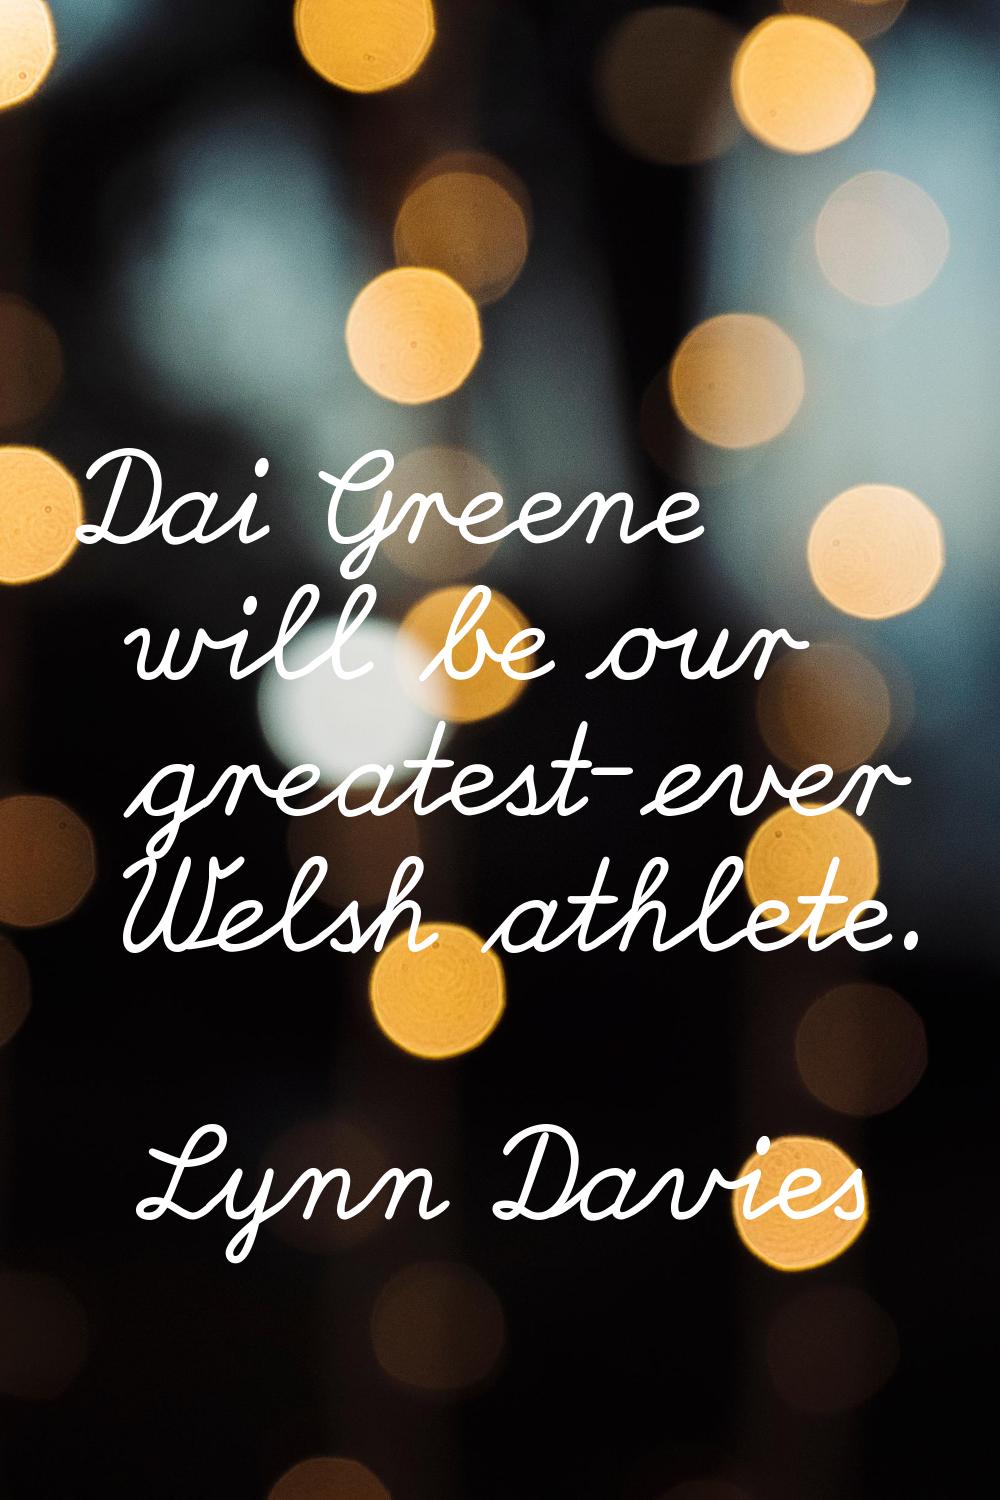 Dai Greene will be our greatest-ever Welsh athlete.